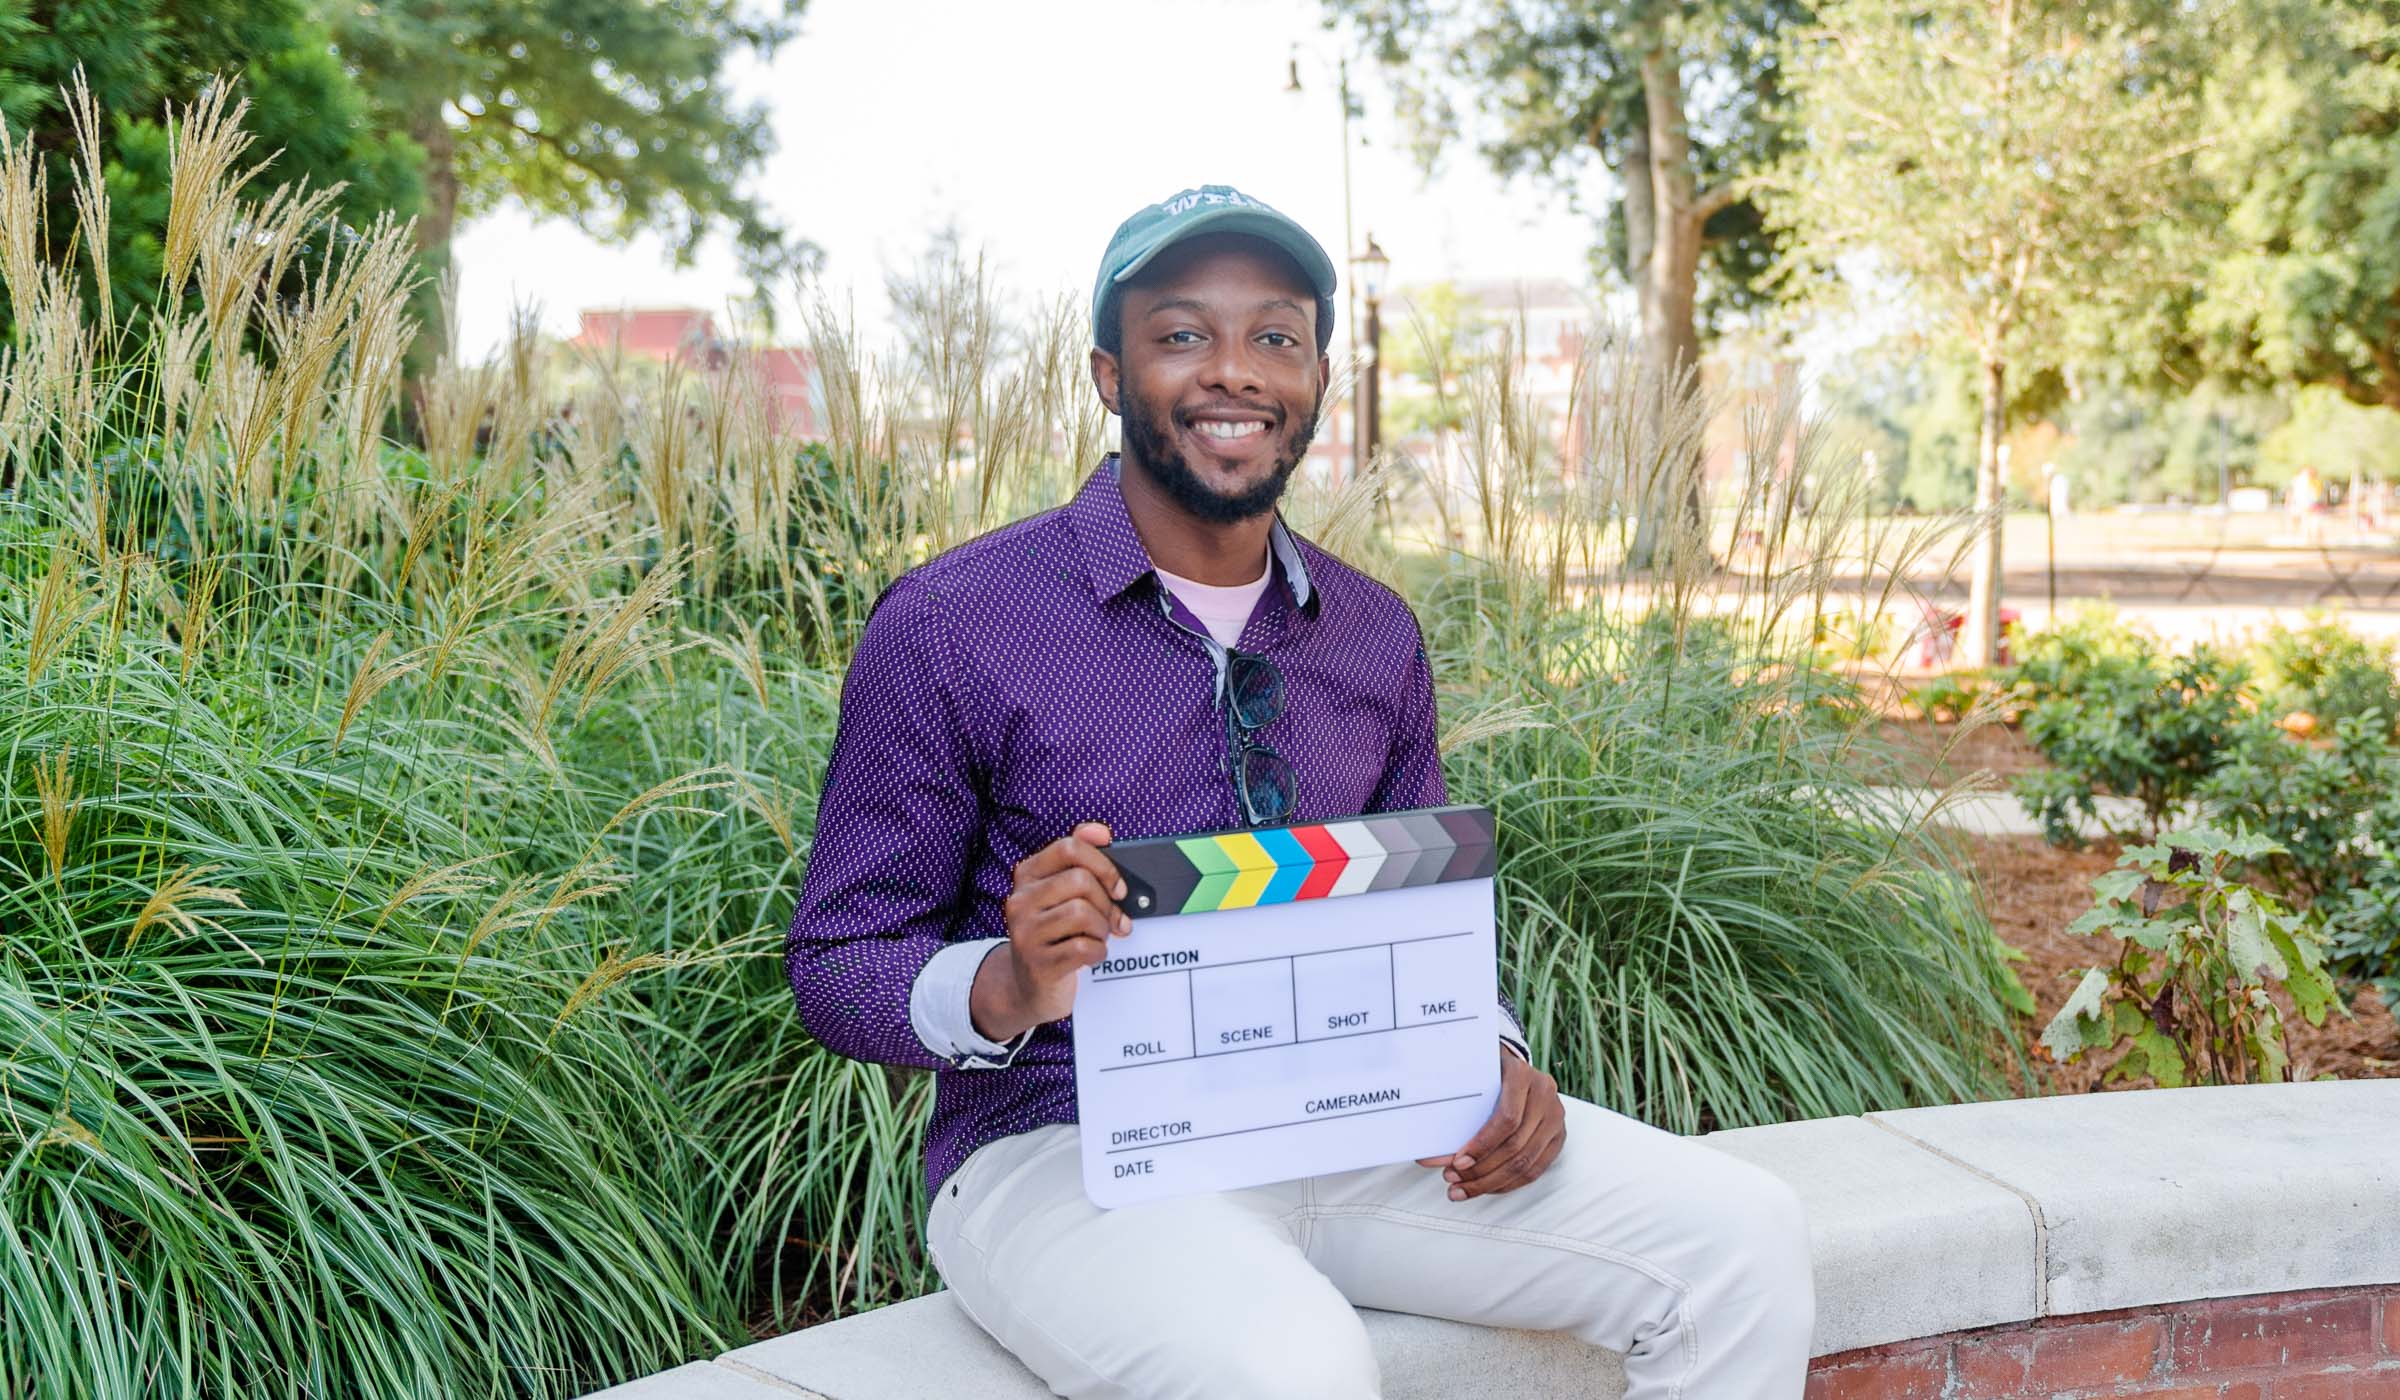 Vernell Allen, pictured holding a clapperboard